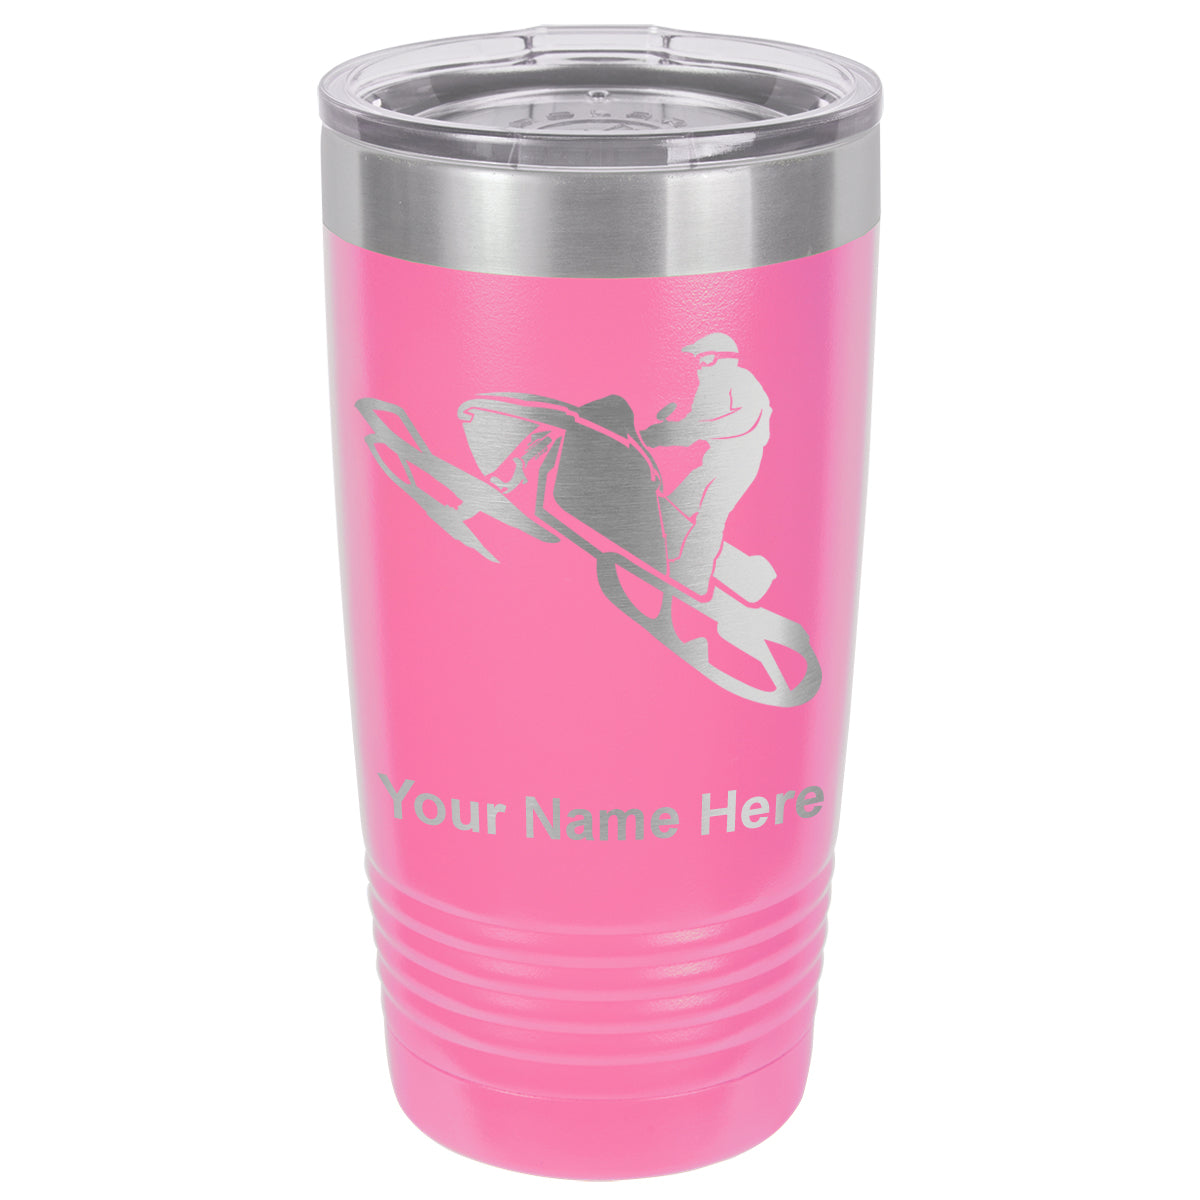 20oz Vacuum Insulated Tumbler Mug, Snowmobile, Personalized Engraving Included